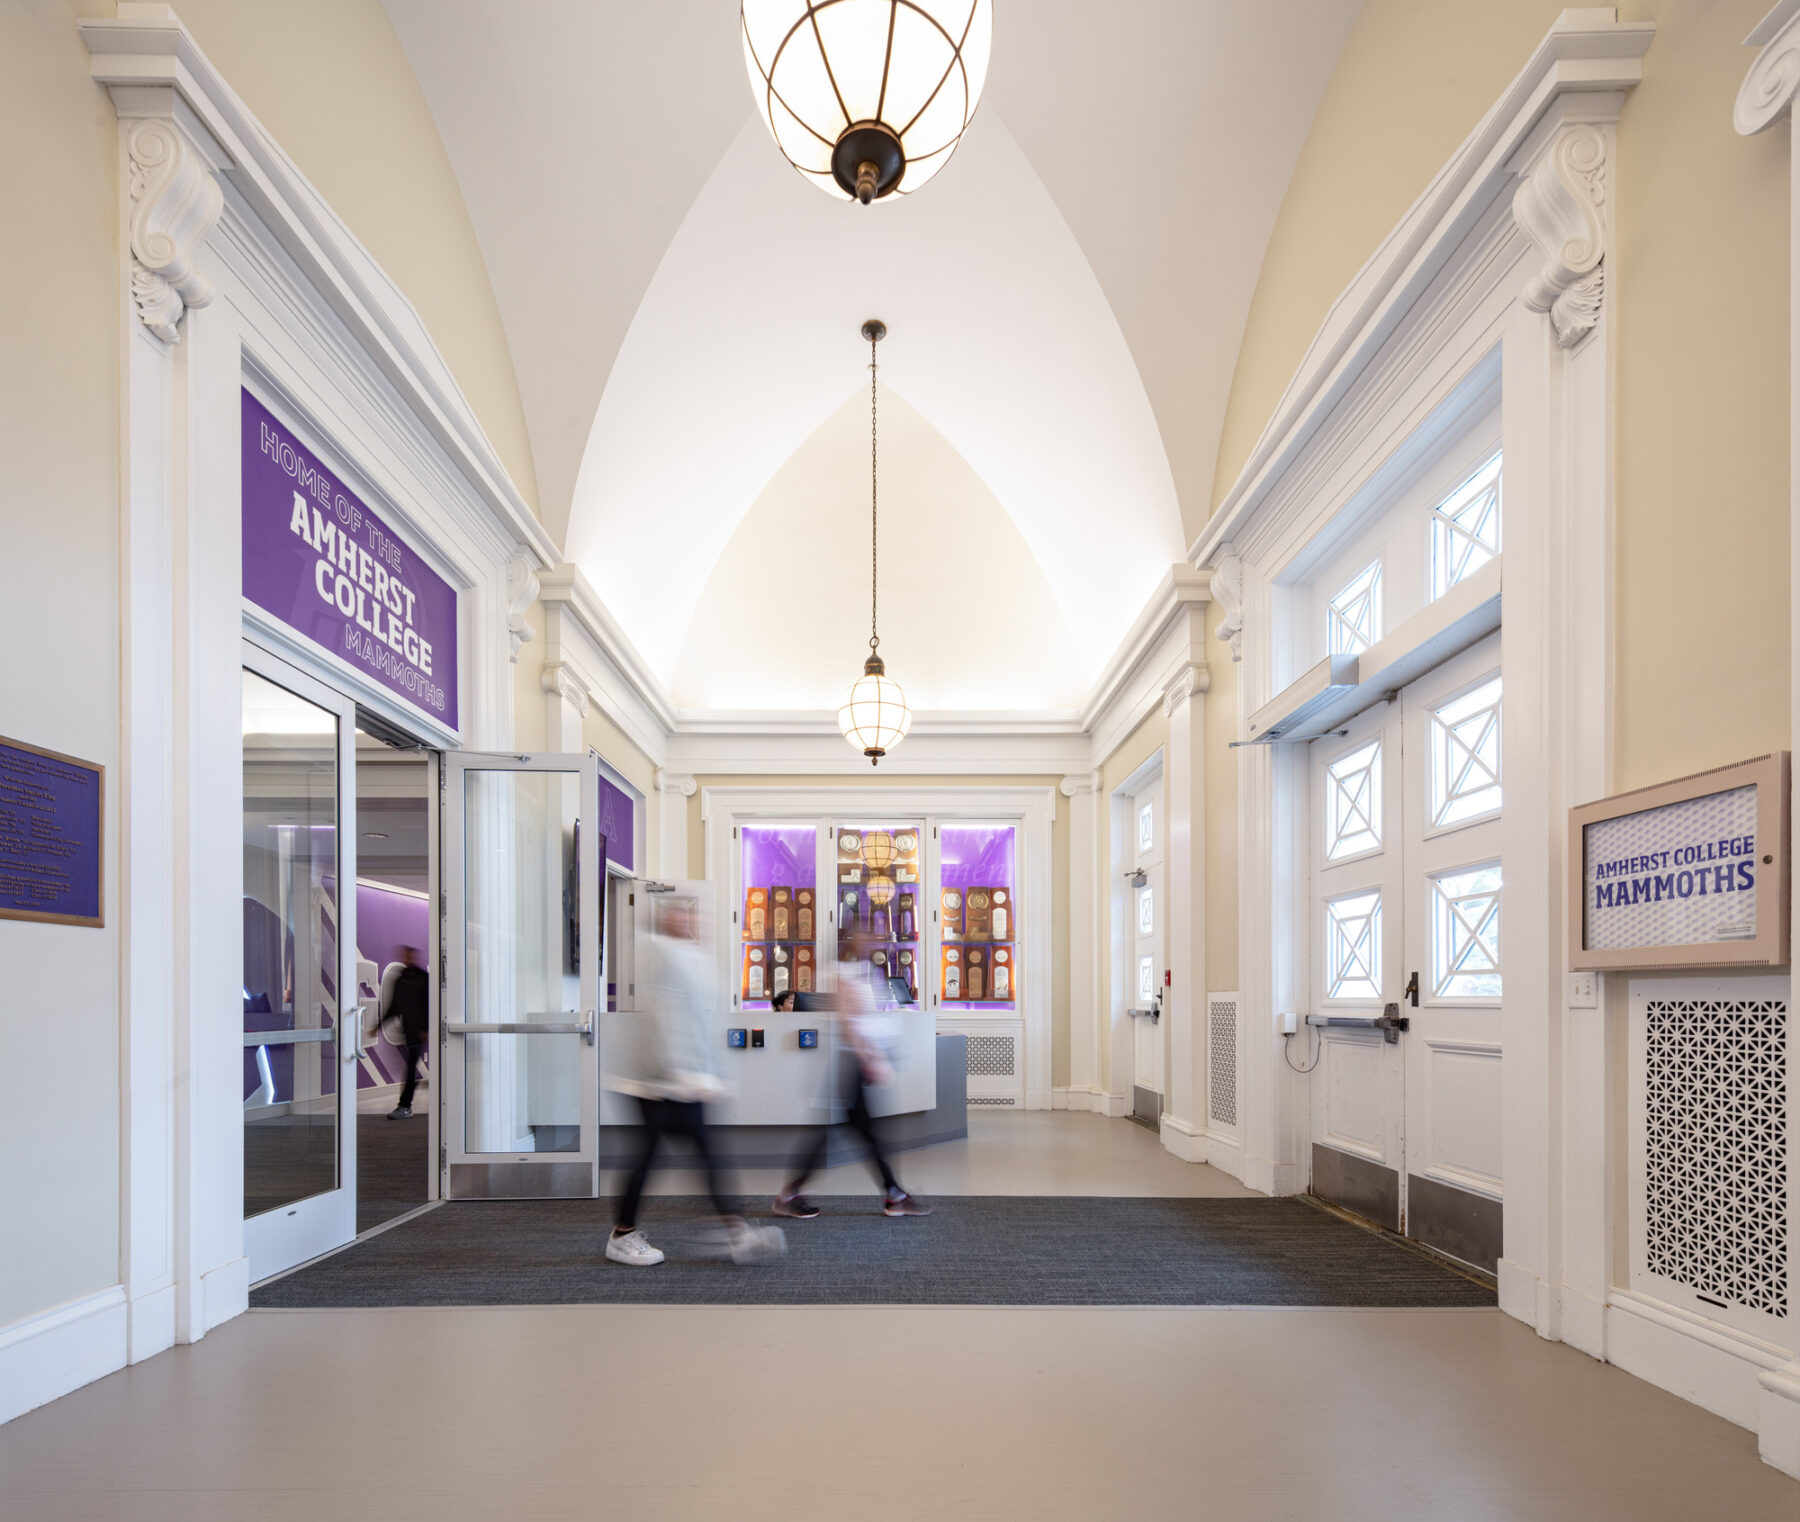 photograph of renovated vestibule space with students walking across frame